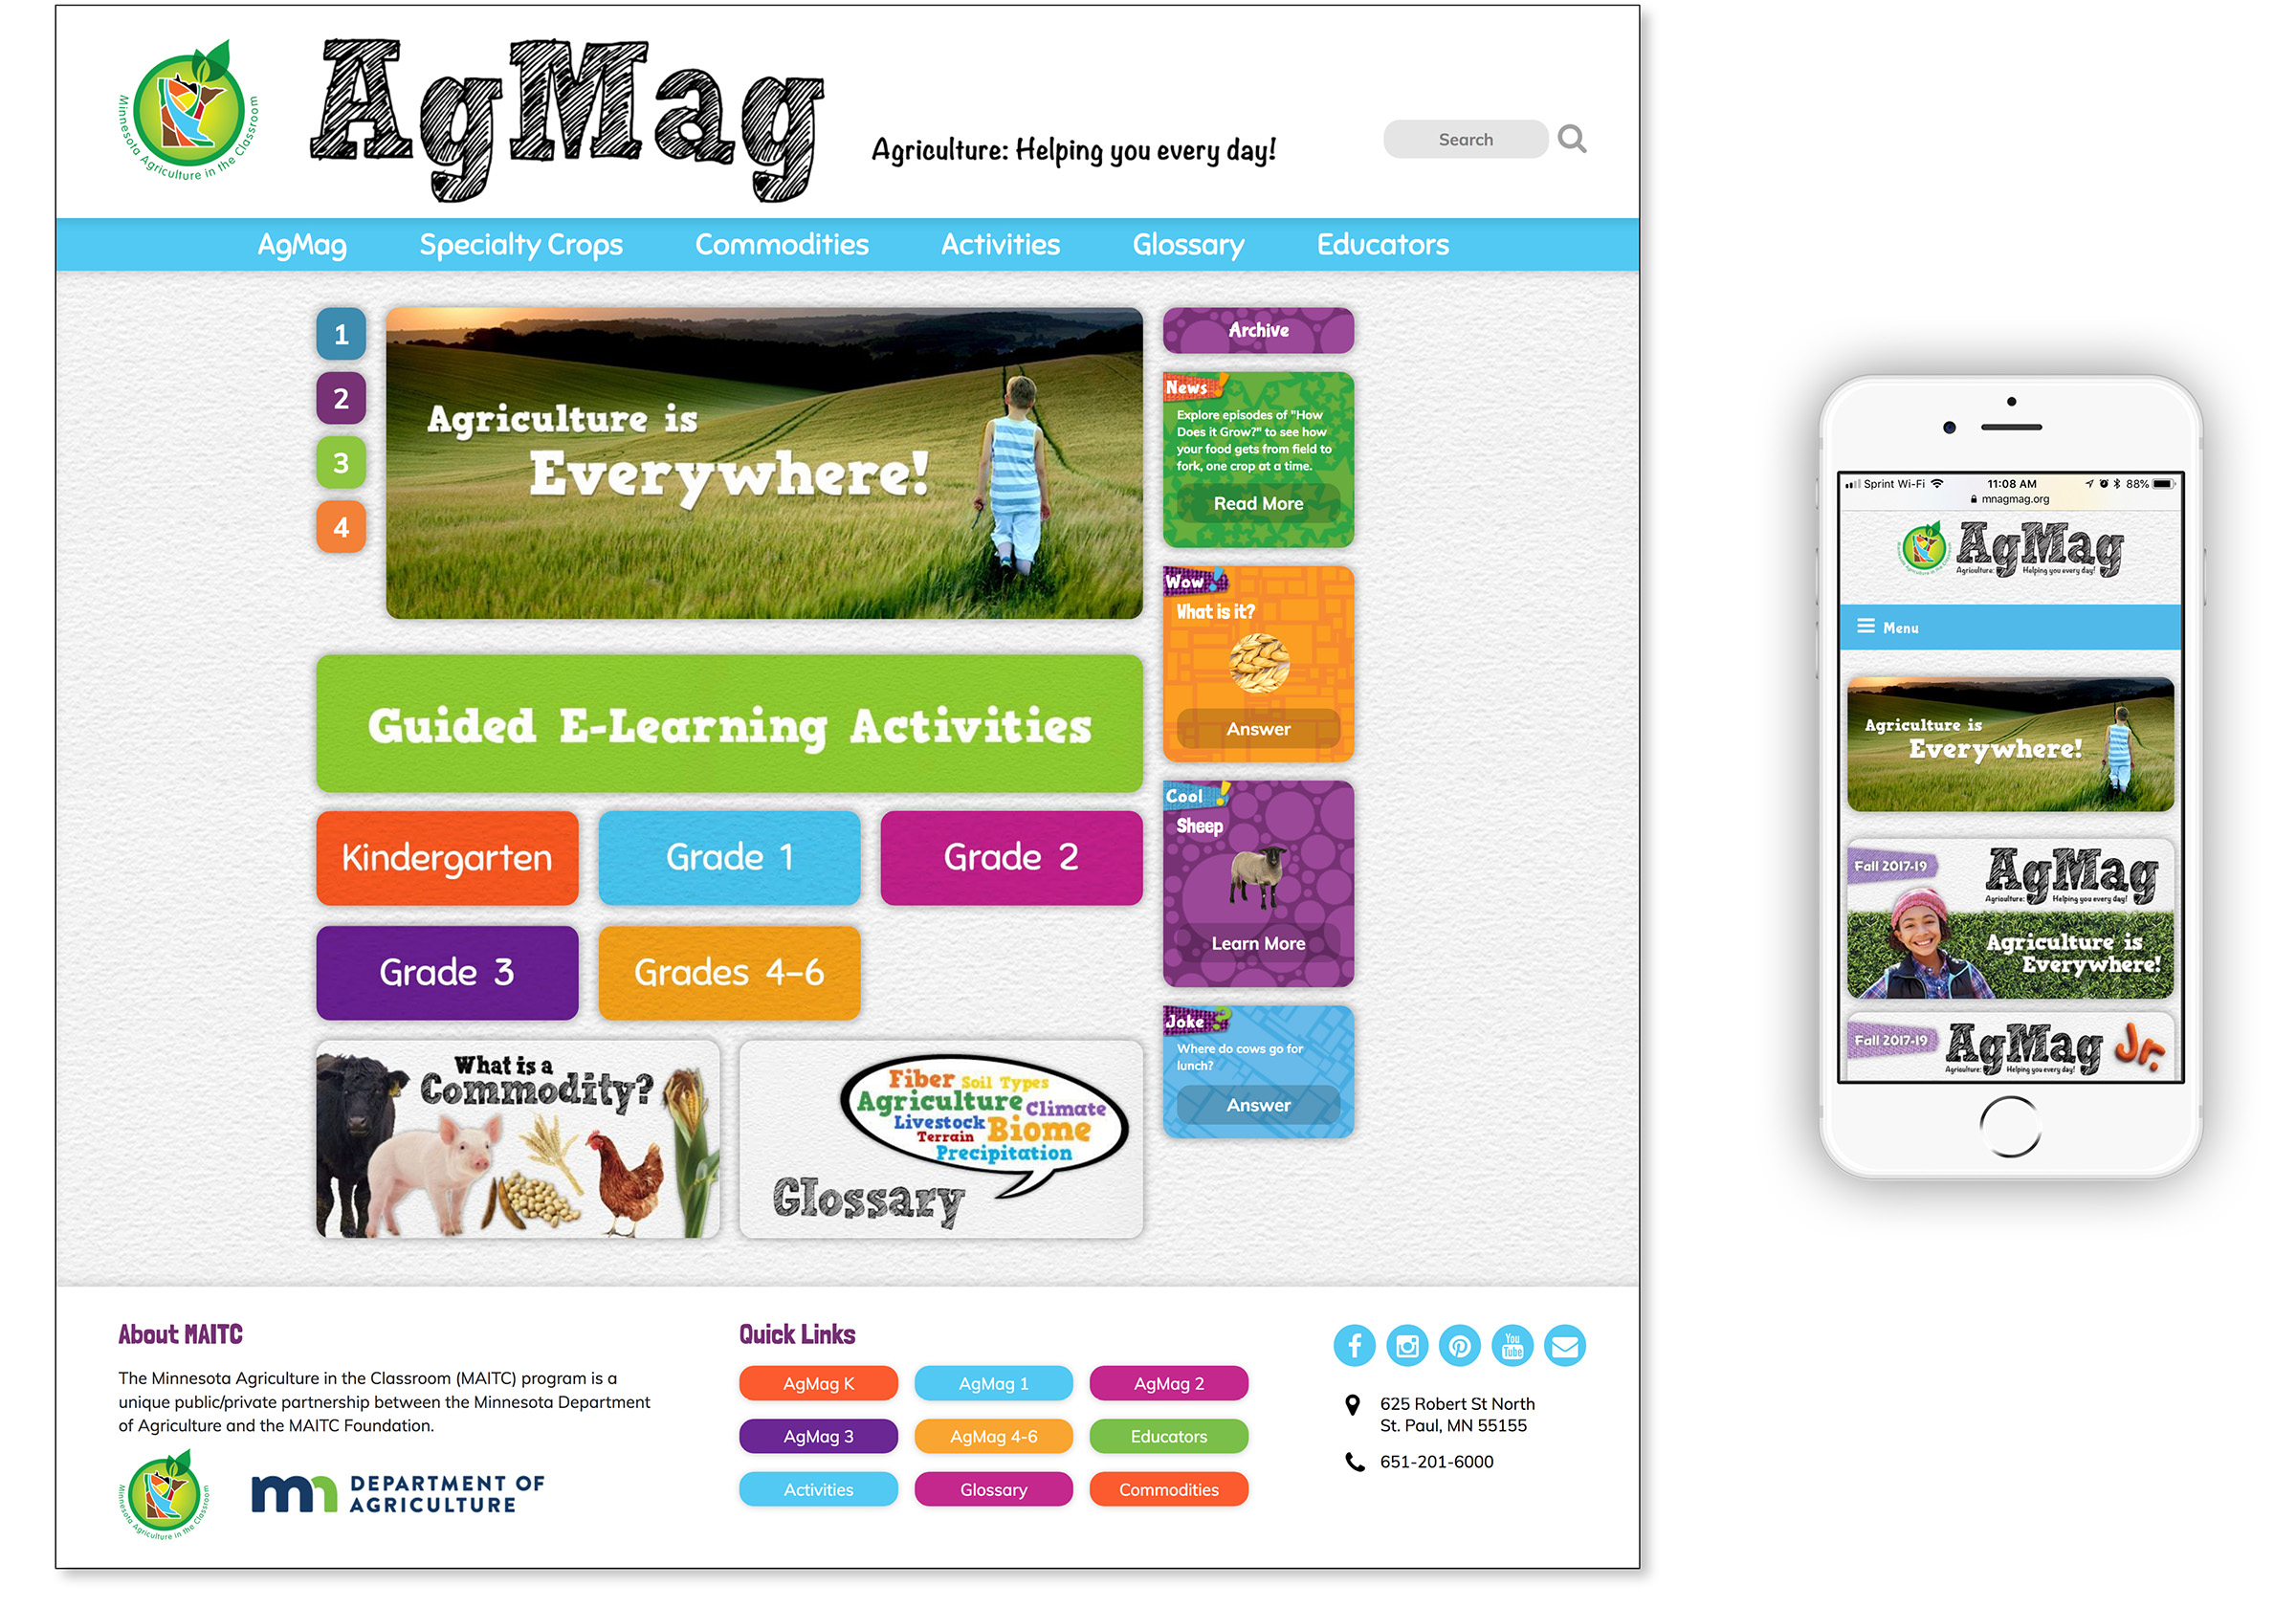 image of the website home page shows colorful and fun graphics geared toward kids in grades K-6 and teachers.